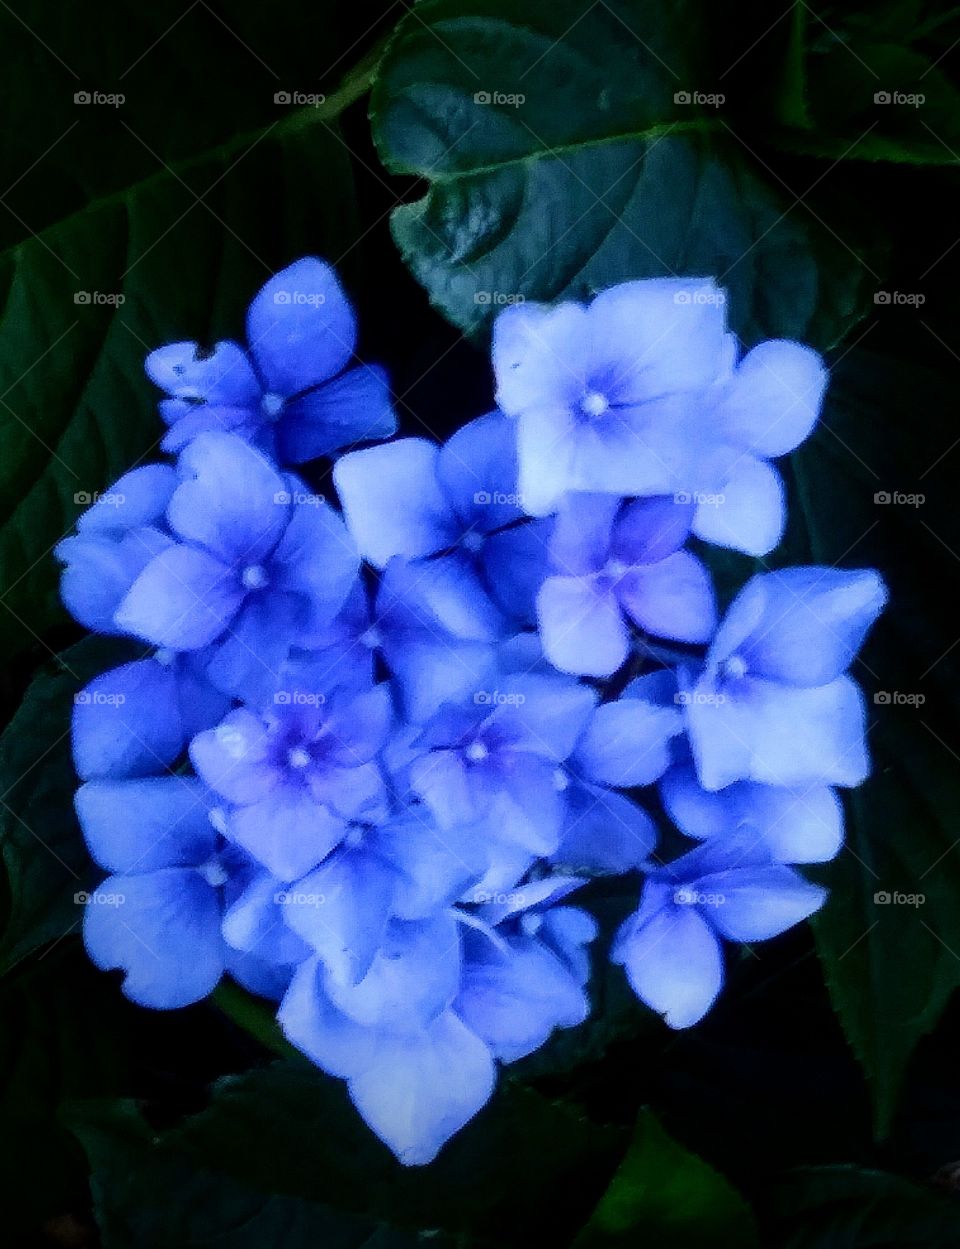 Hydrangea blossoms so blue they almost glow.